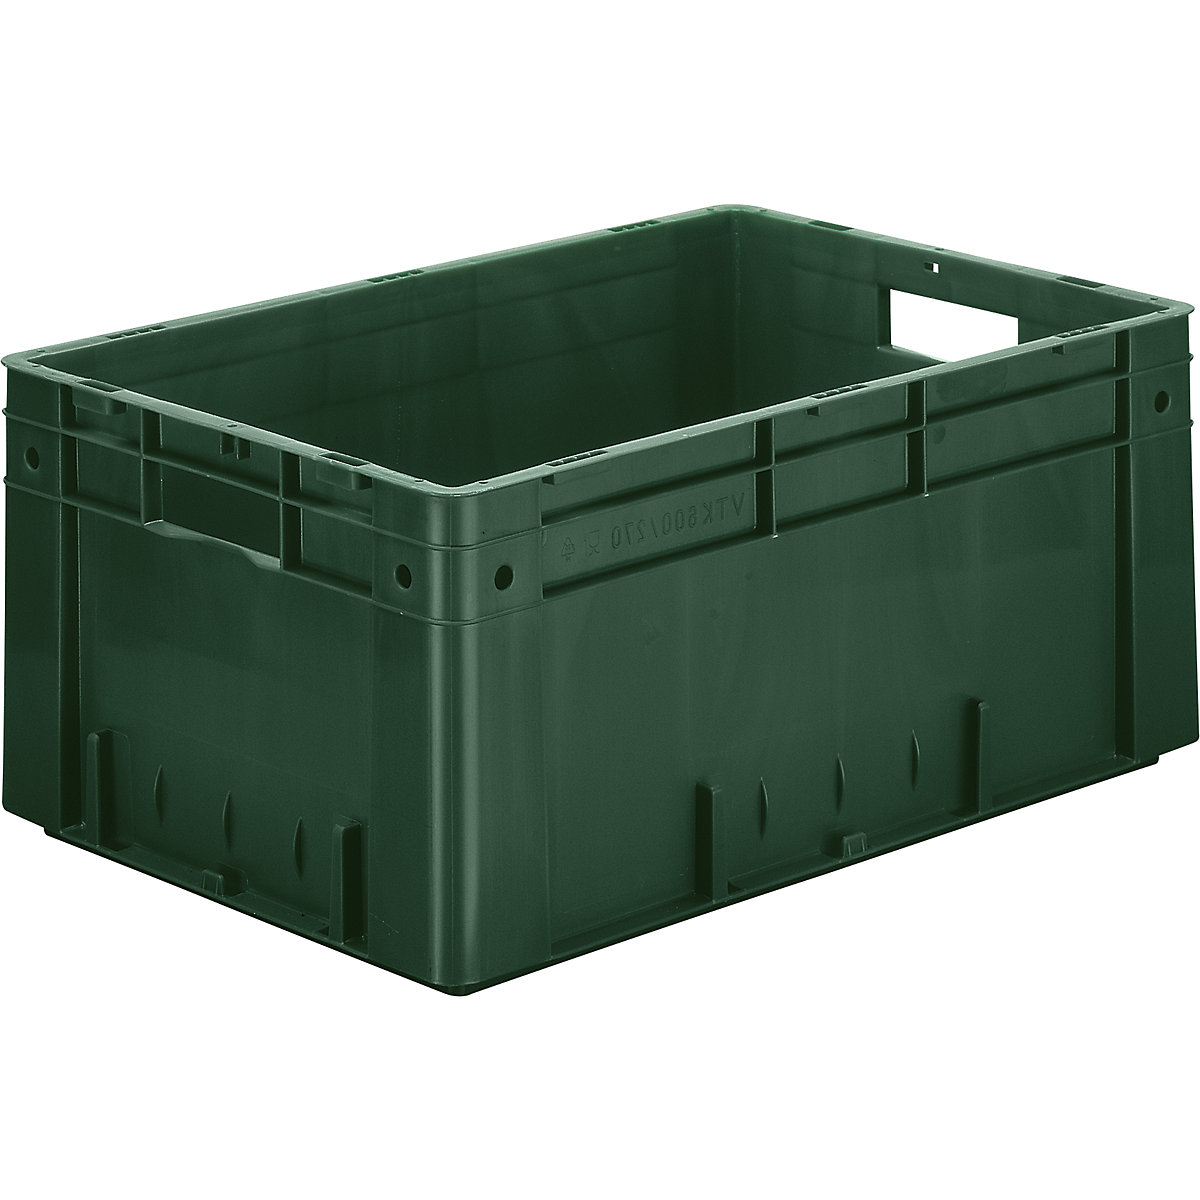 Heavy duty Euro container, polypropylene, capacity 50 l, LxWxH 600 x 400 x 270 mm, solid walls, solid base, green, pack of 2-3